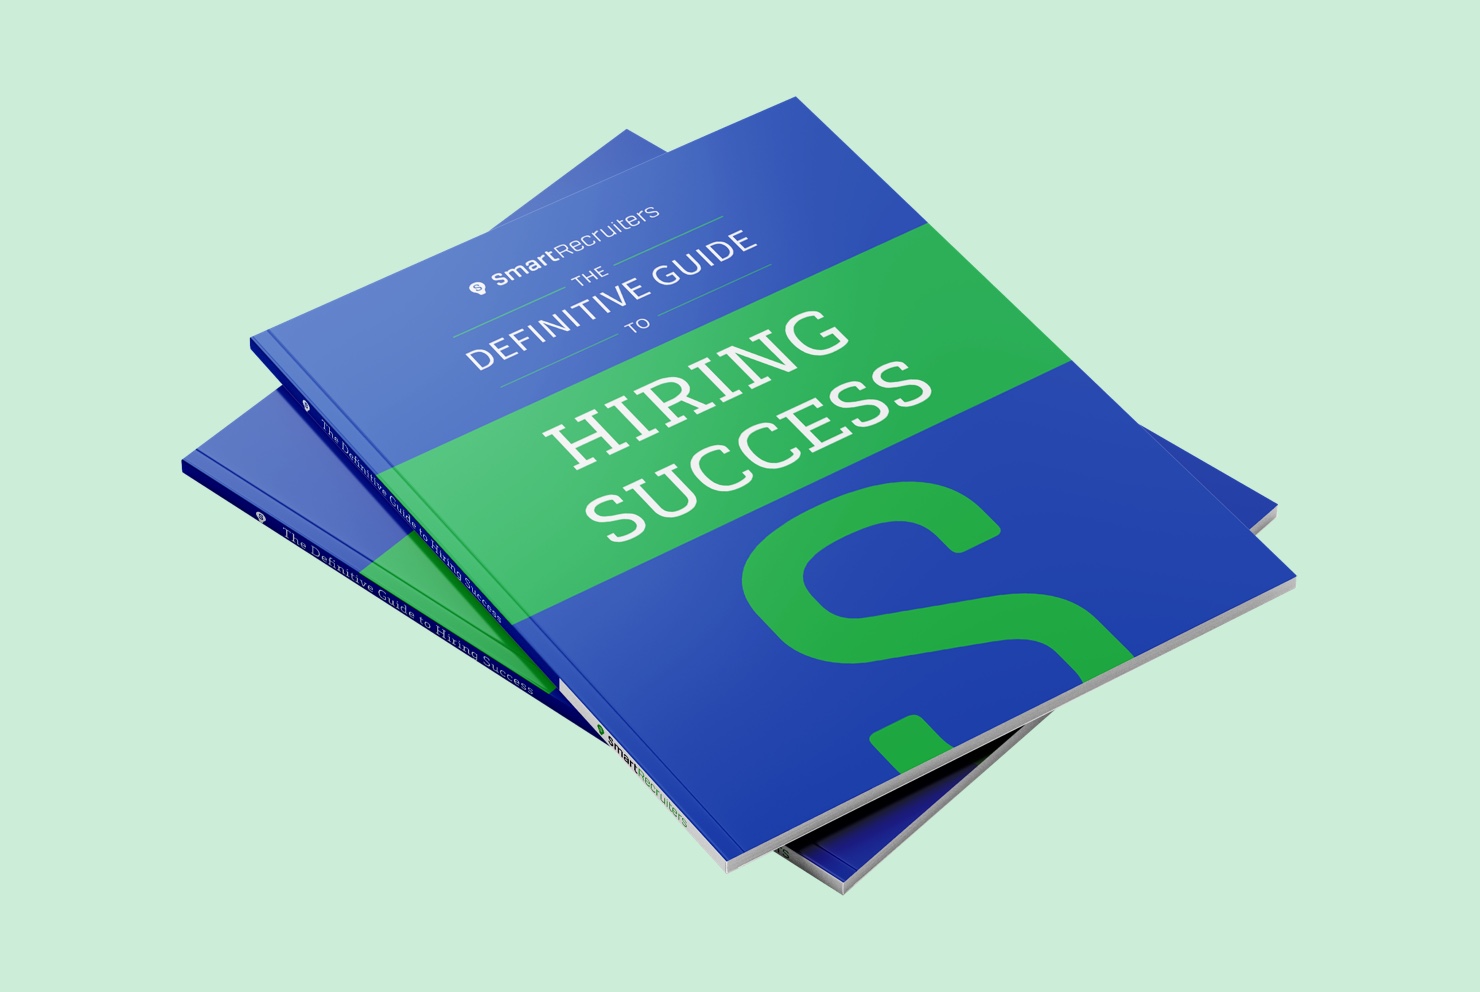 The definitive guide to hiring success 